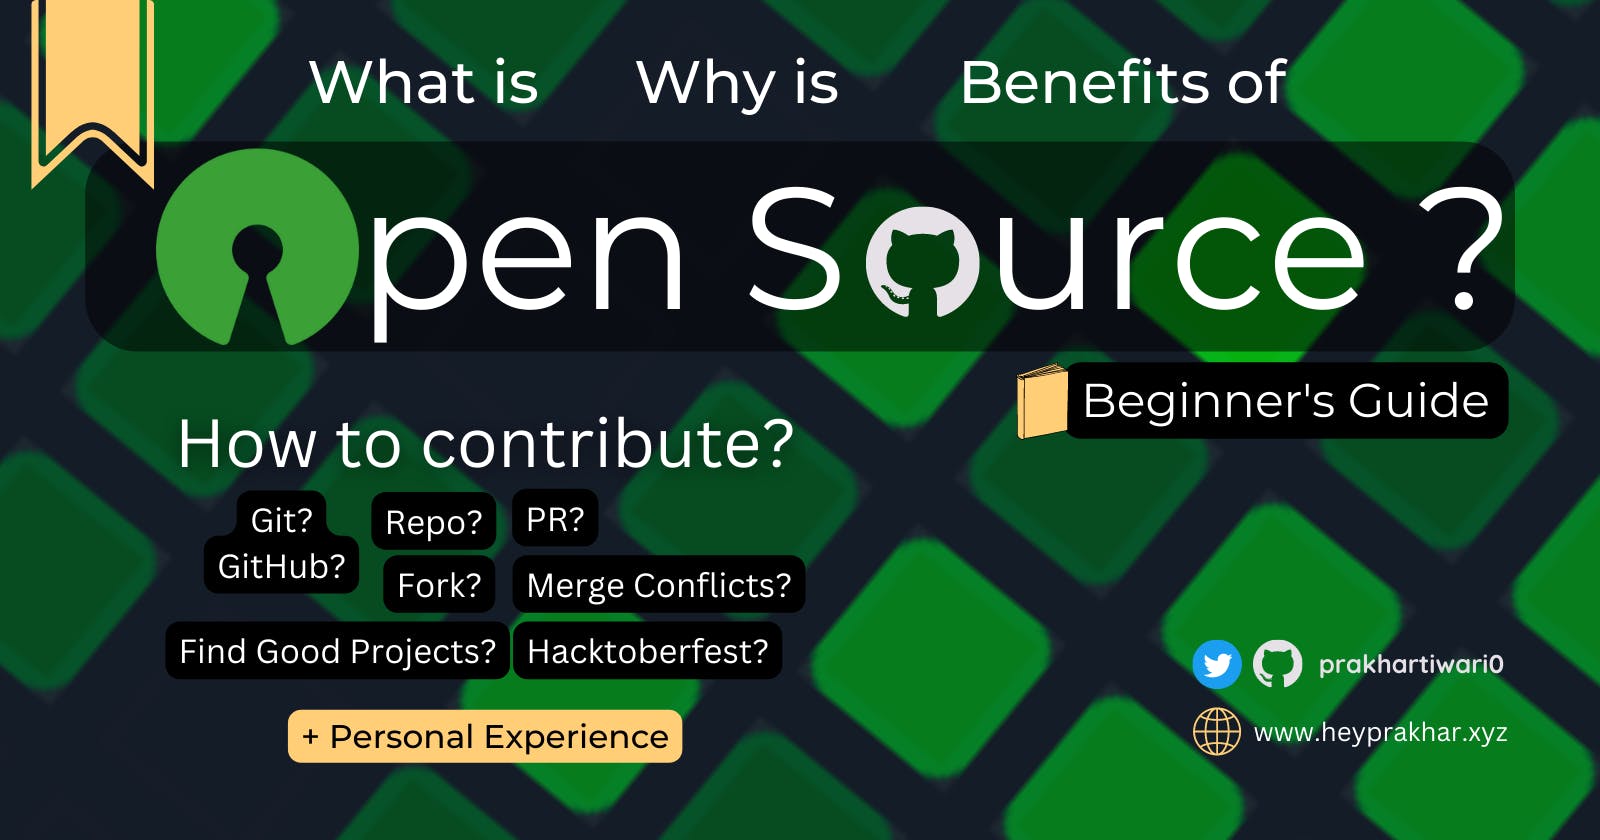 New to Open Source? Know everything you need to!